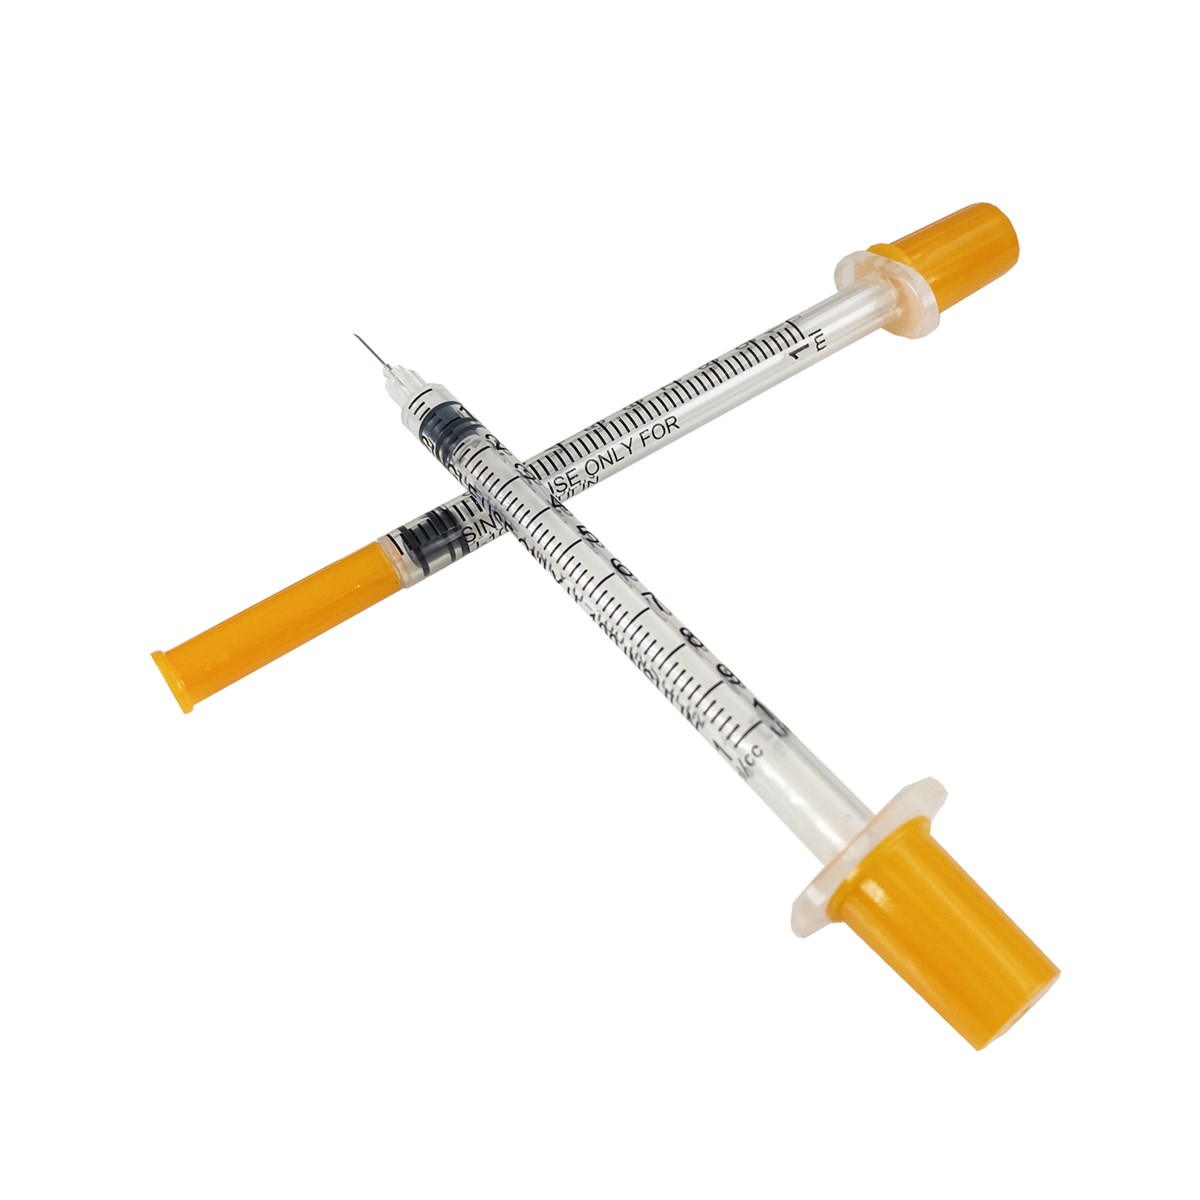 Medtpoint Sterile Insulin Syringe 1ml 29g 13mm U100 U40 For Single Use 100pcs Per Box From China Manufacturer Manufactory Factory And Supplier On Ecvv Com